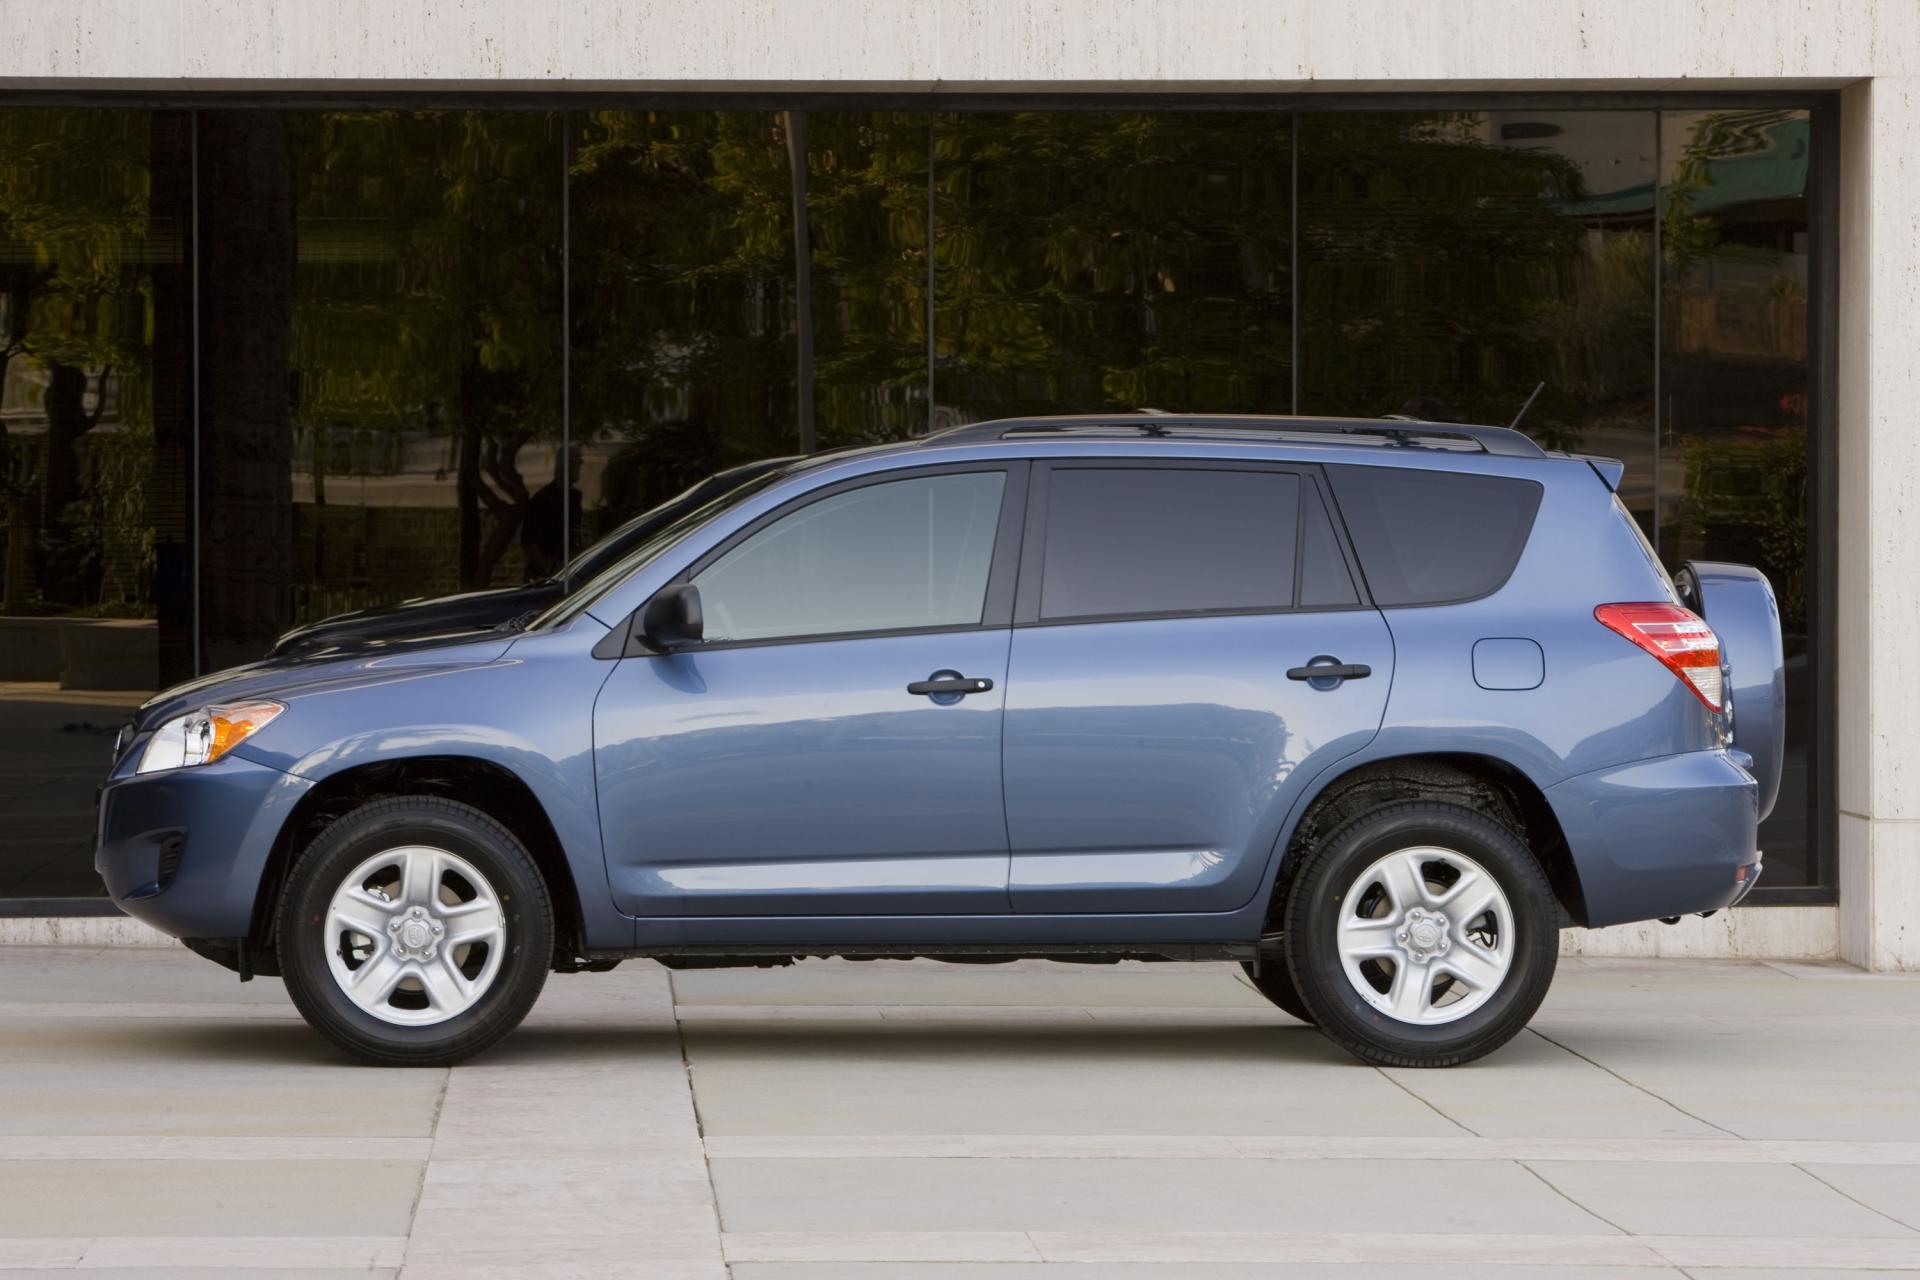 2012 Toyota RAV4 Technical Specifications and data. Engine, Dimensions